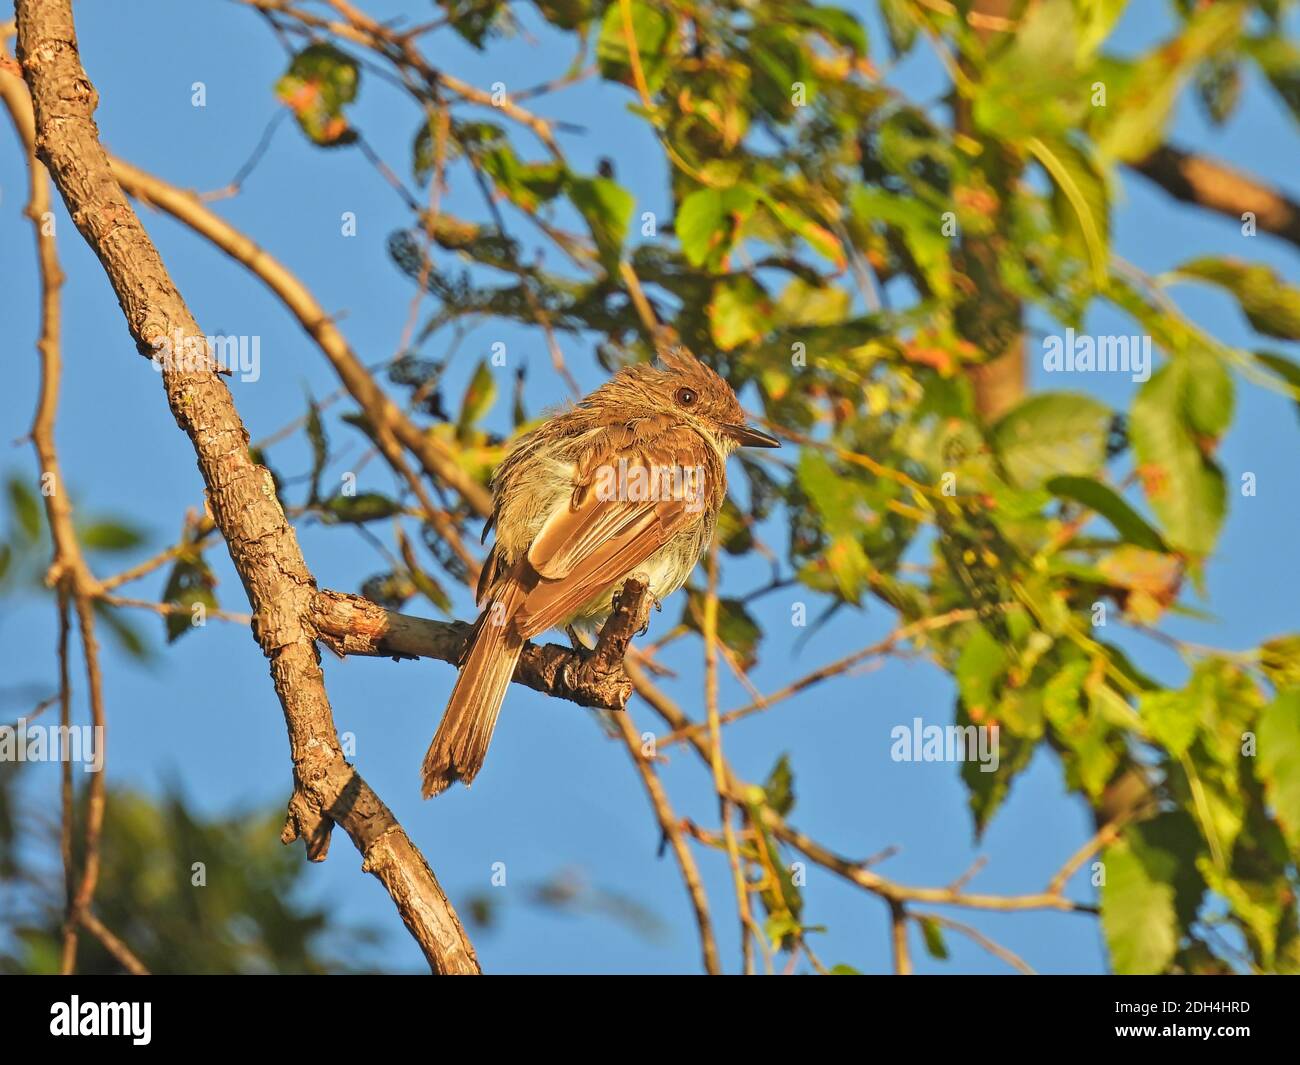 Flycatcher Bird Molting on a Sunny Morning Perched on Tree Branch at Dawn Sunrise Looking to the Side Stock Photo